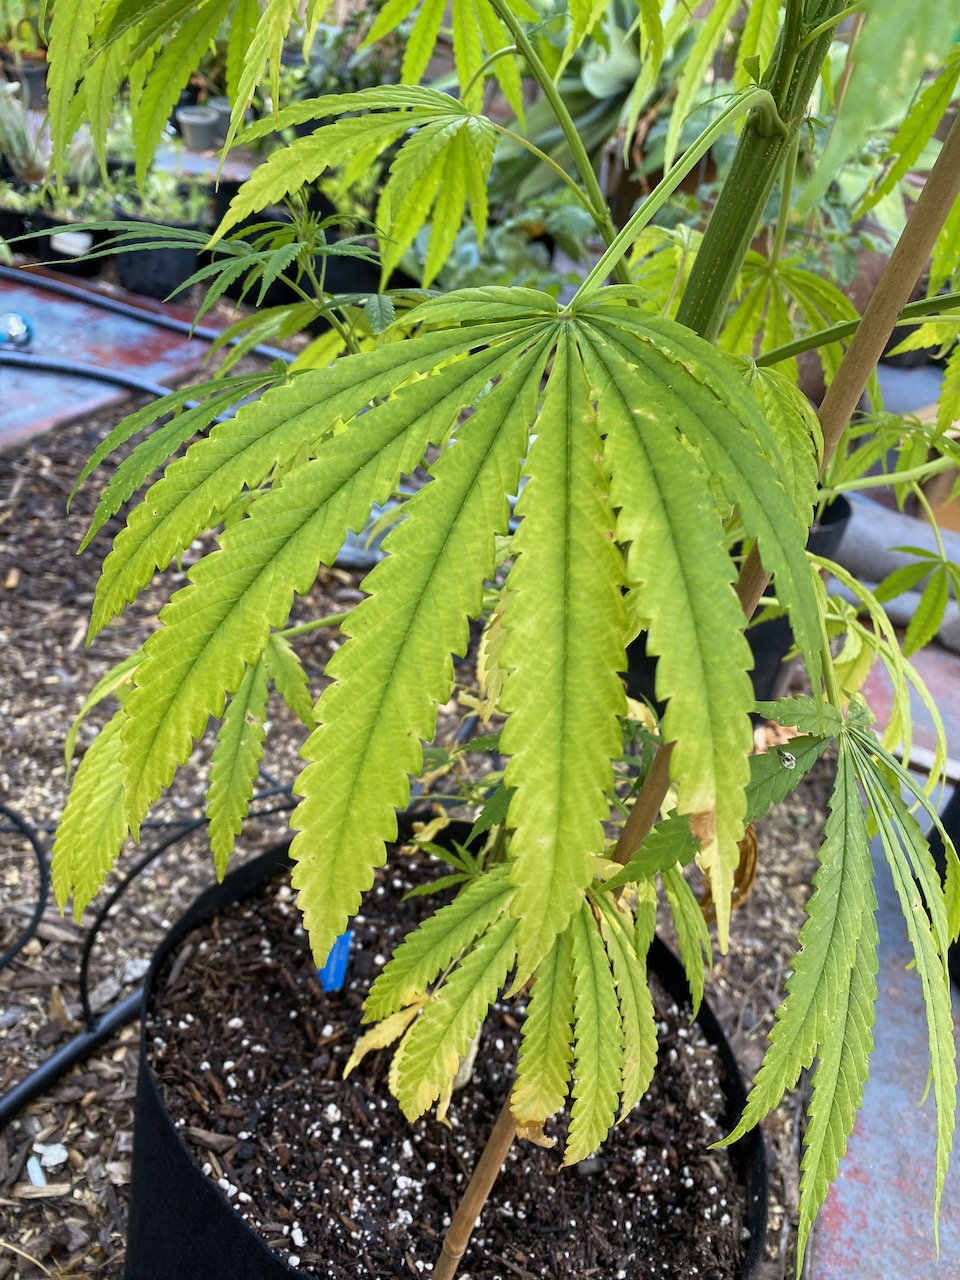 Leaves yellowing some spotting nutrient deficiency or